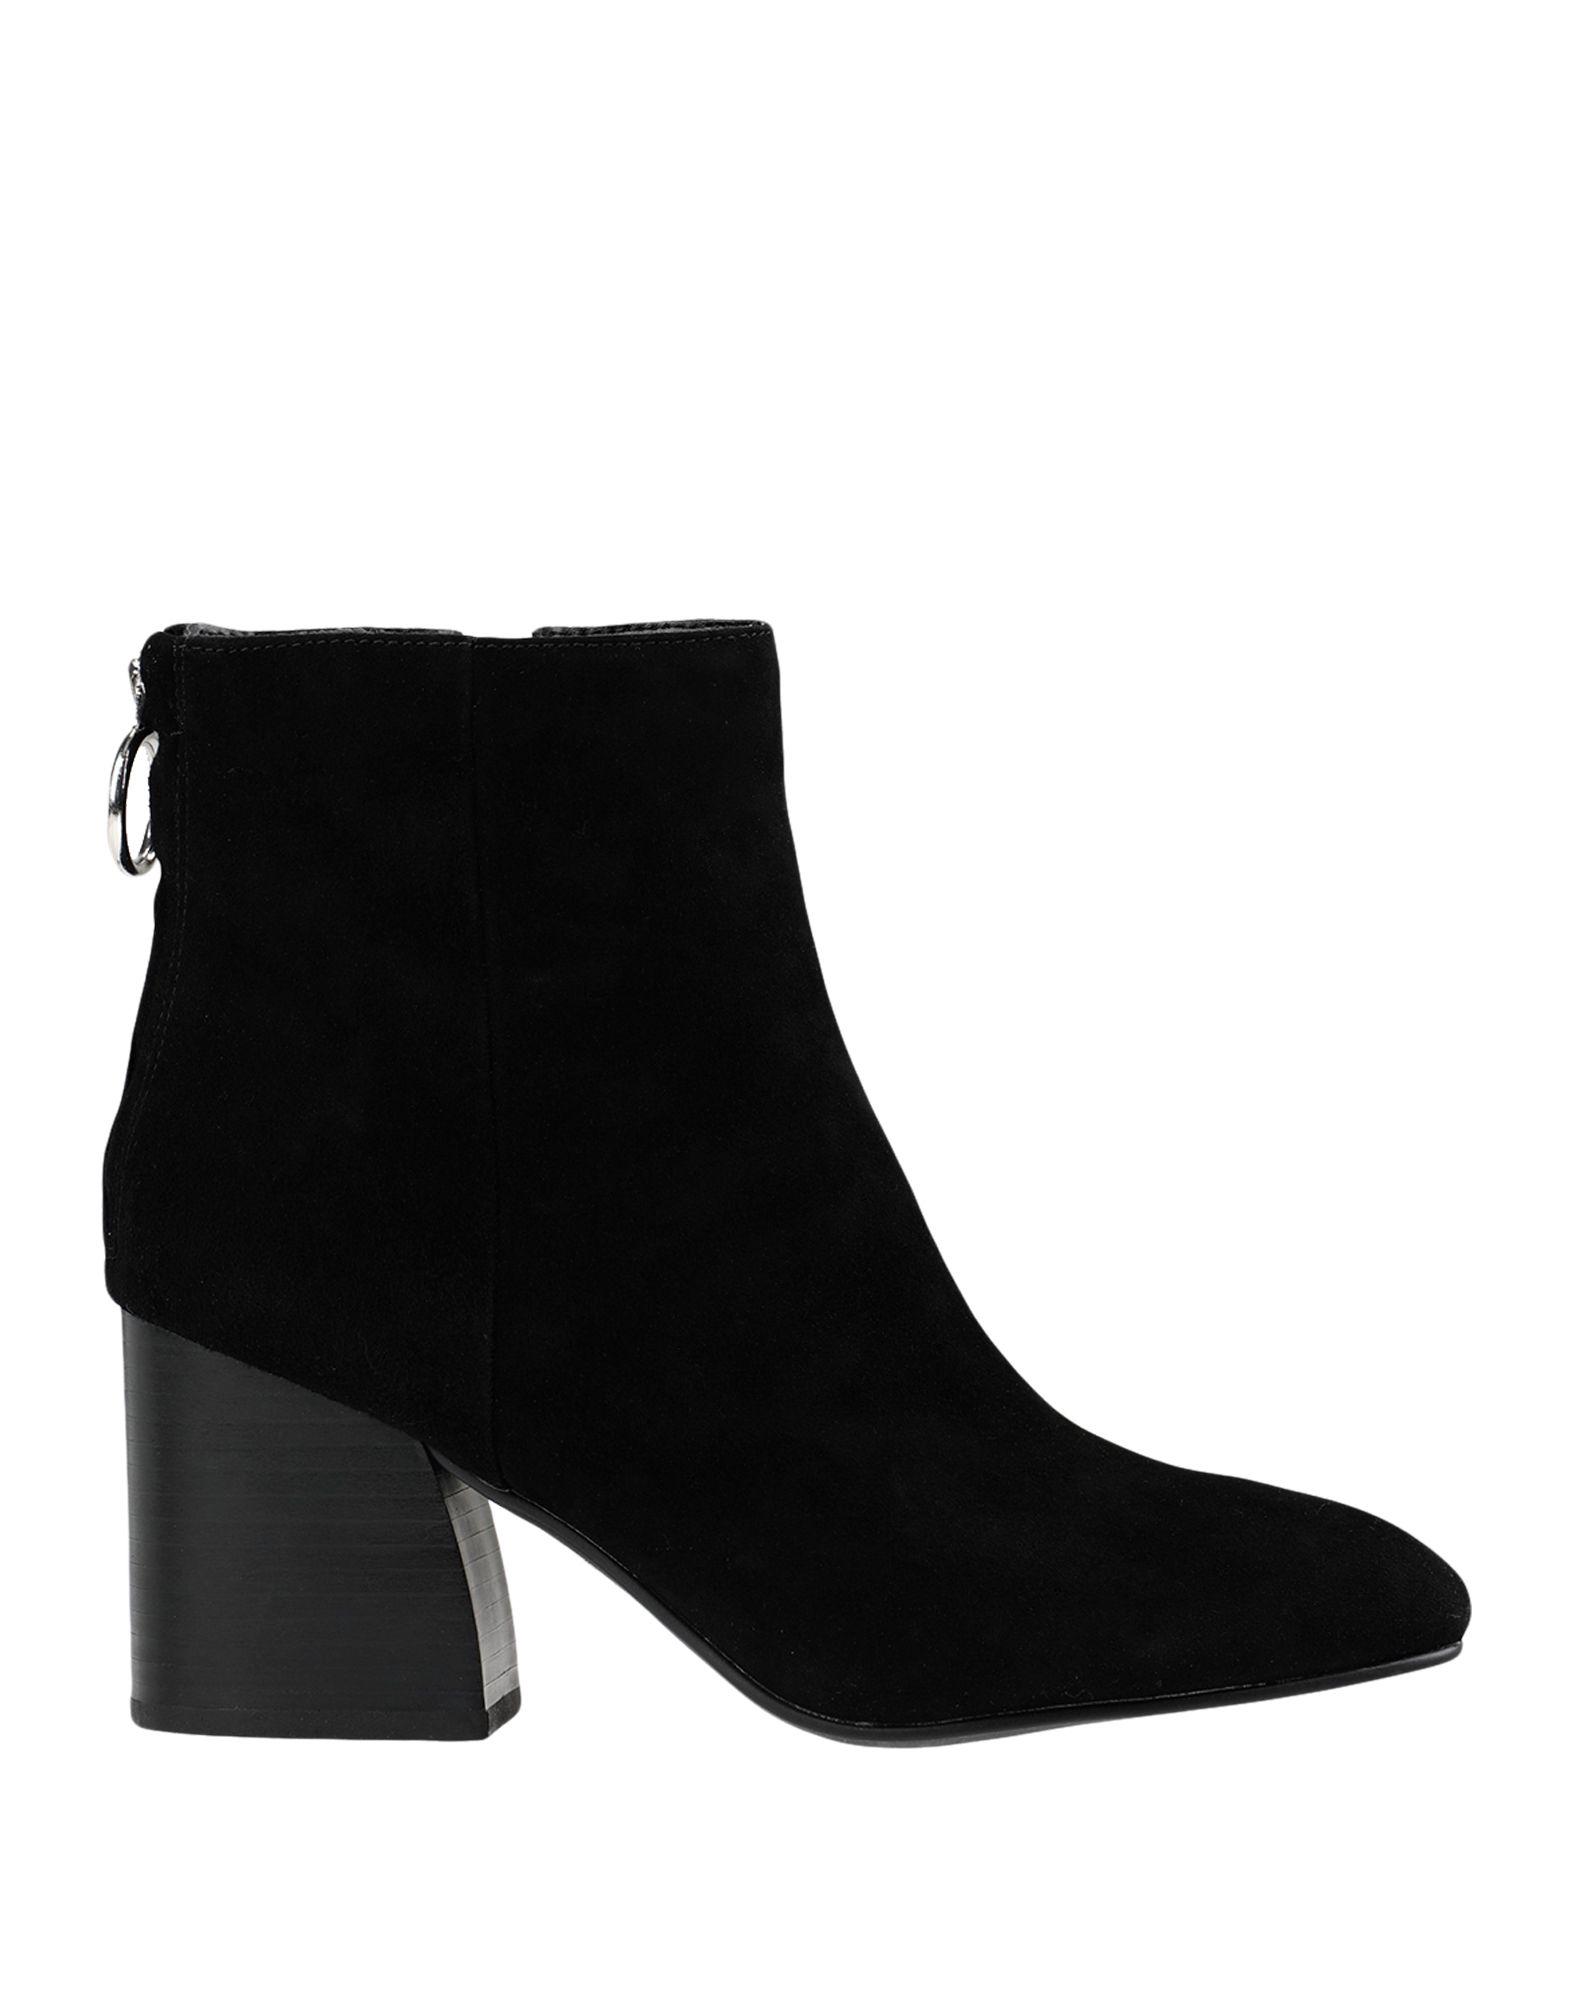 Steve Madden Suede Ankle Boots in Black - Lyst